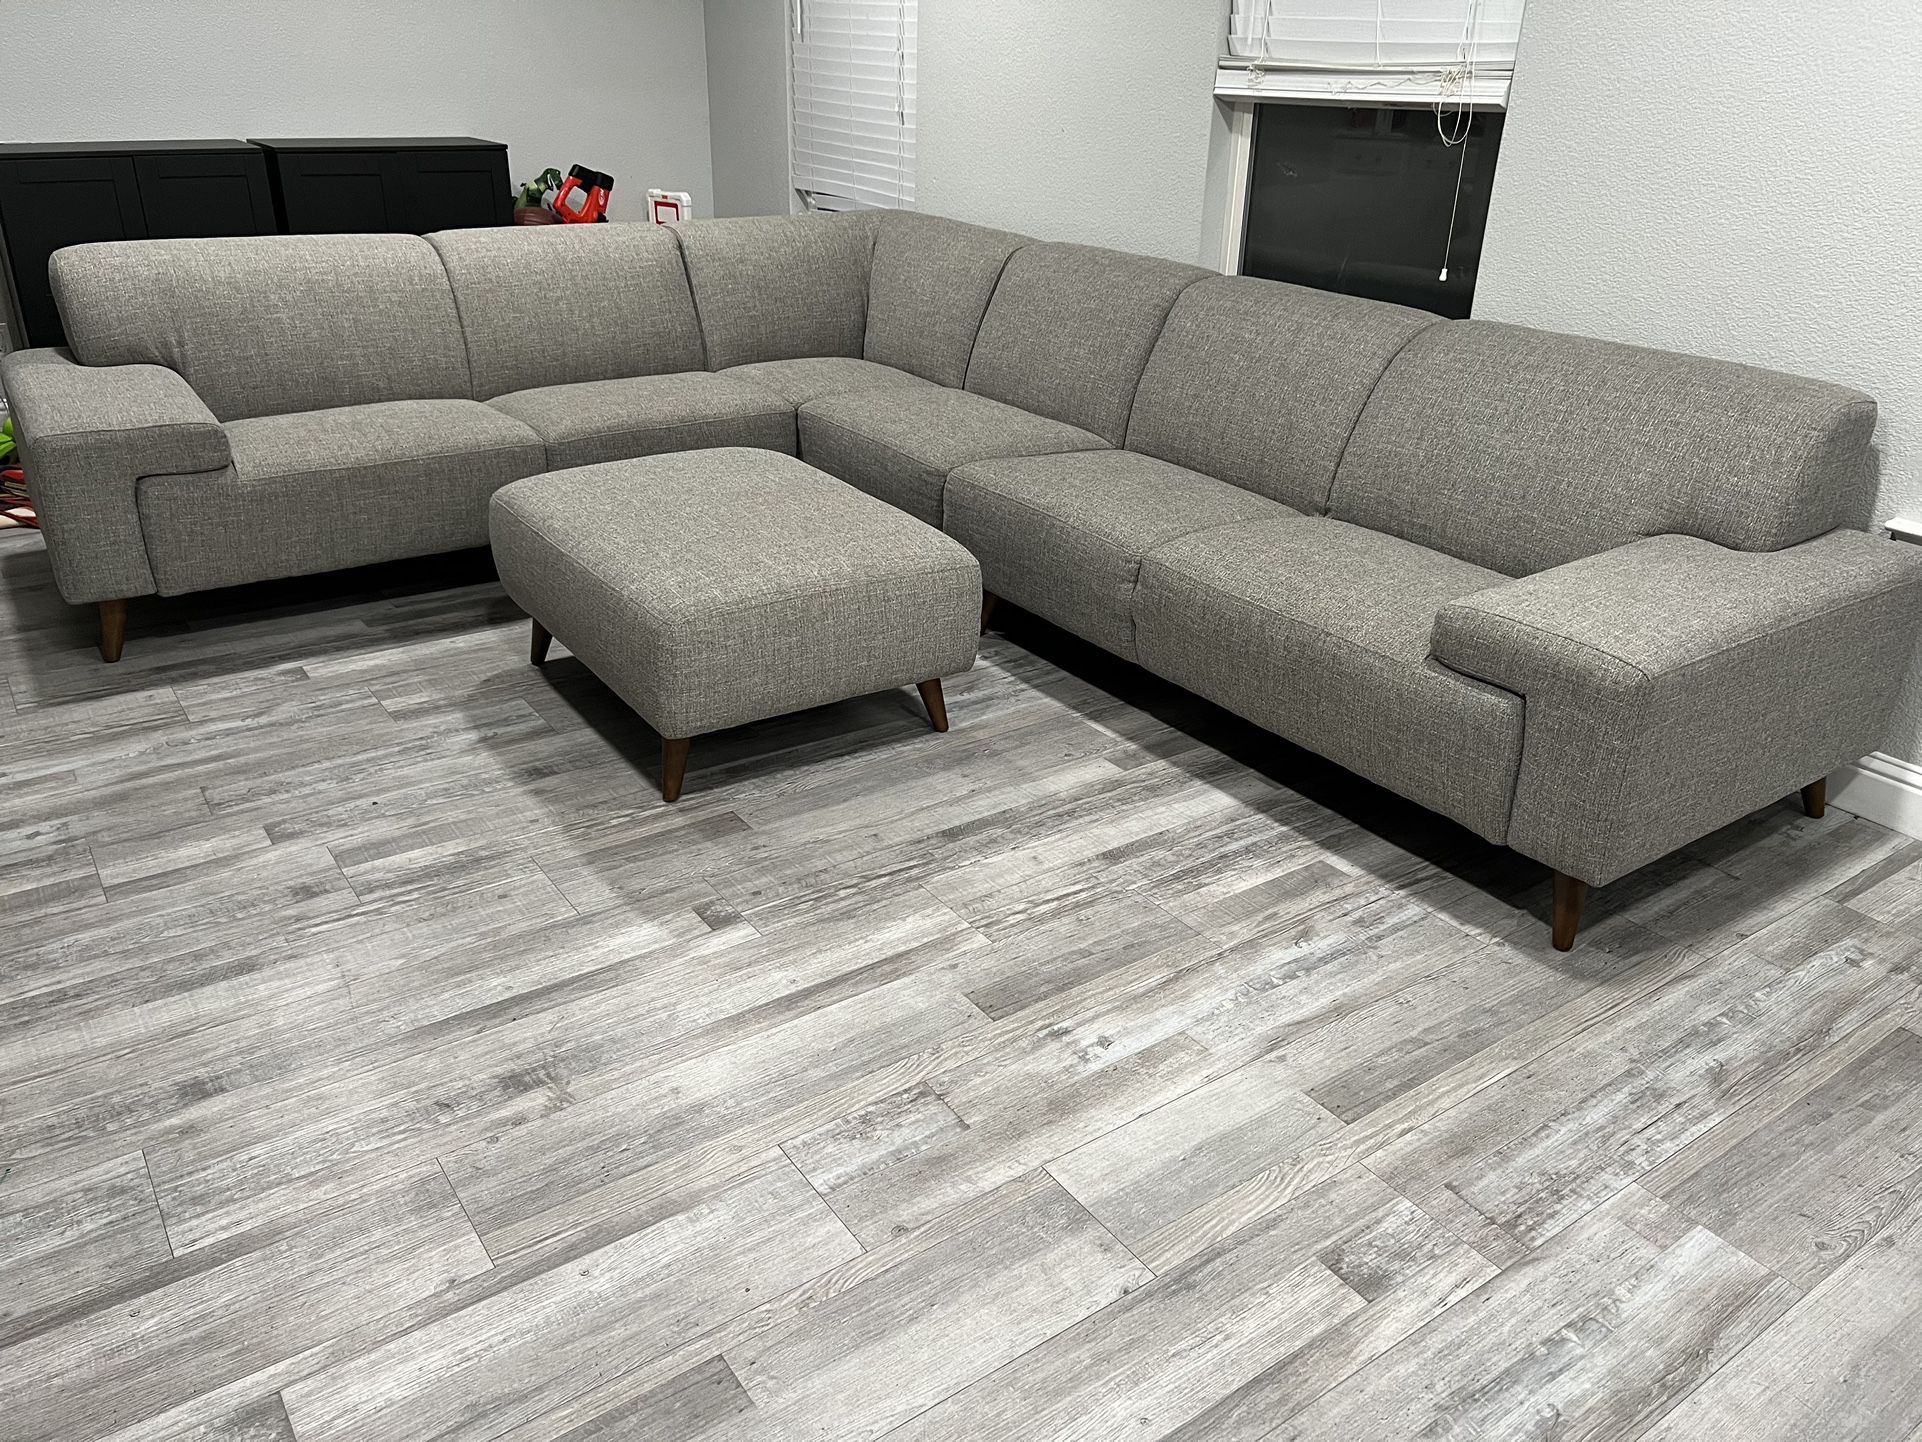 Grey Sectional Sofa ! Sectional Couch ! Grey Sofa ! Huge Sectional ! Modern Sectional Sofa ! Free Delivery